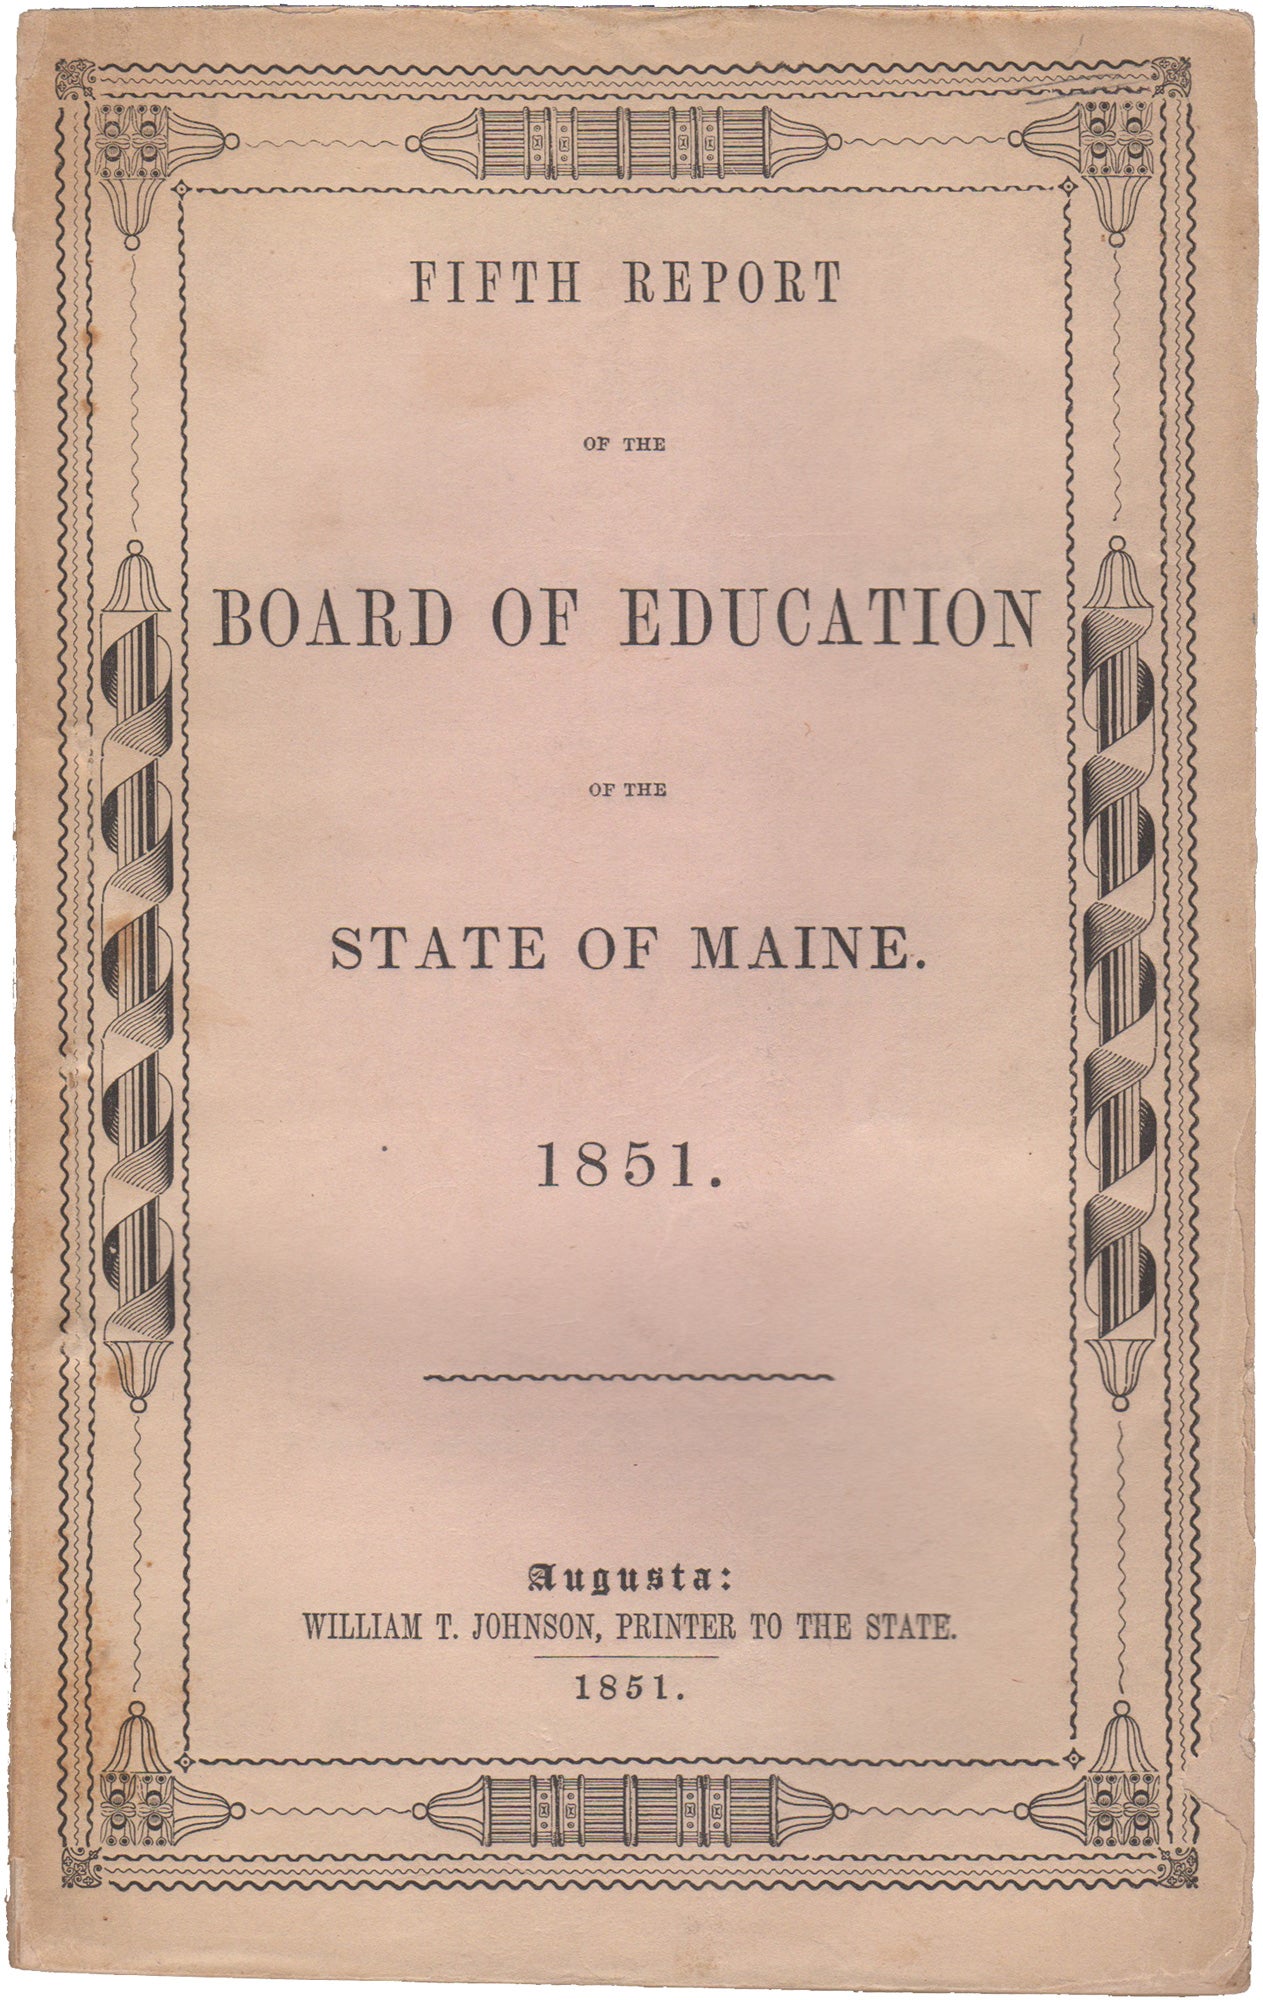 [Maine. Board of Education] - Fifth Report of the Board of Education of the State of Maine. 1851. Published Agreeably to Resolve of March 22, 1836